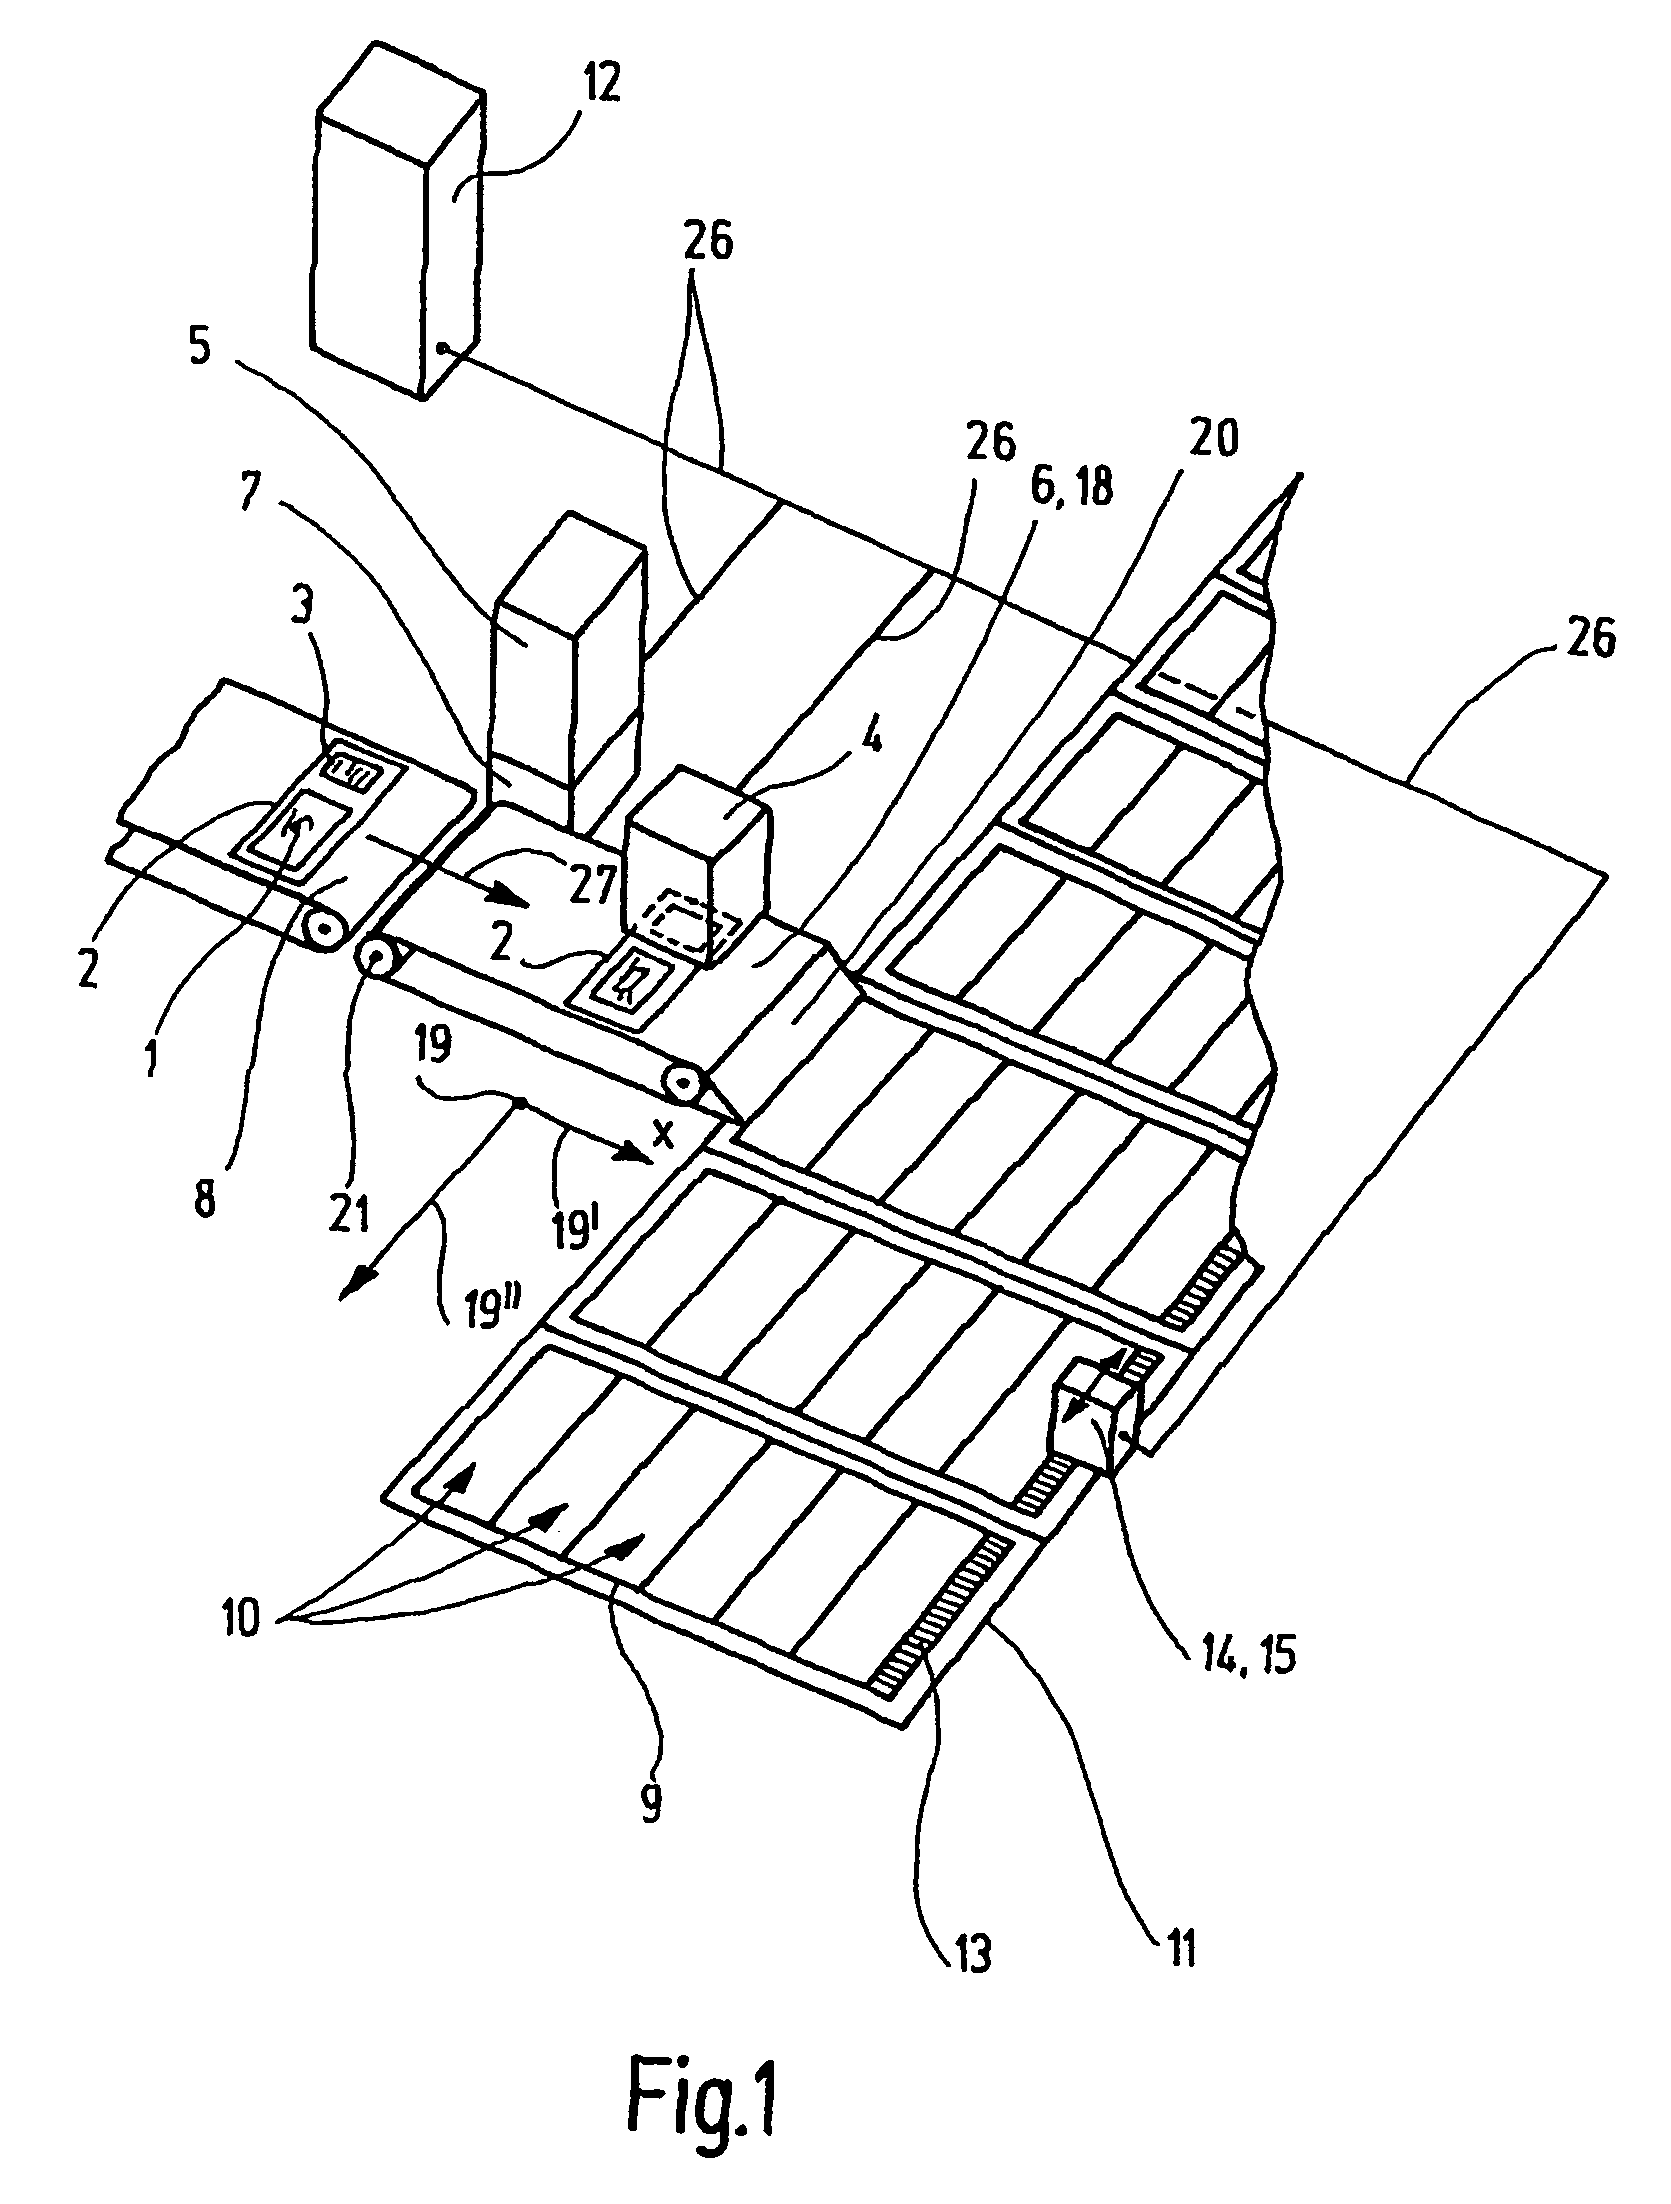 Apparatus for handling and classifying microtomized tissue samples